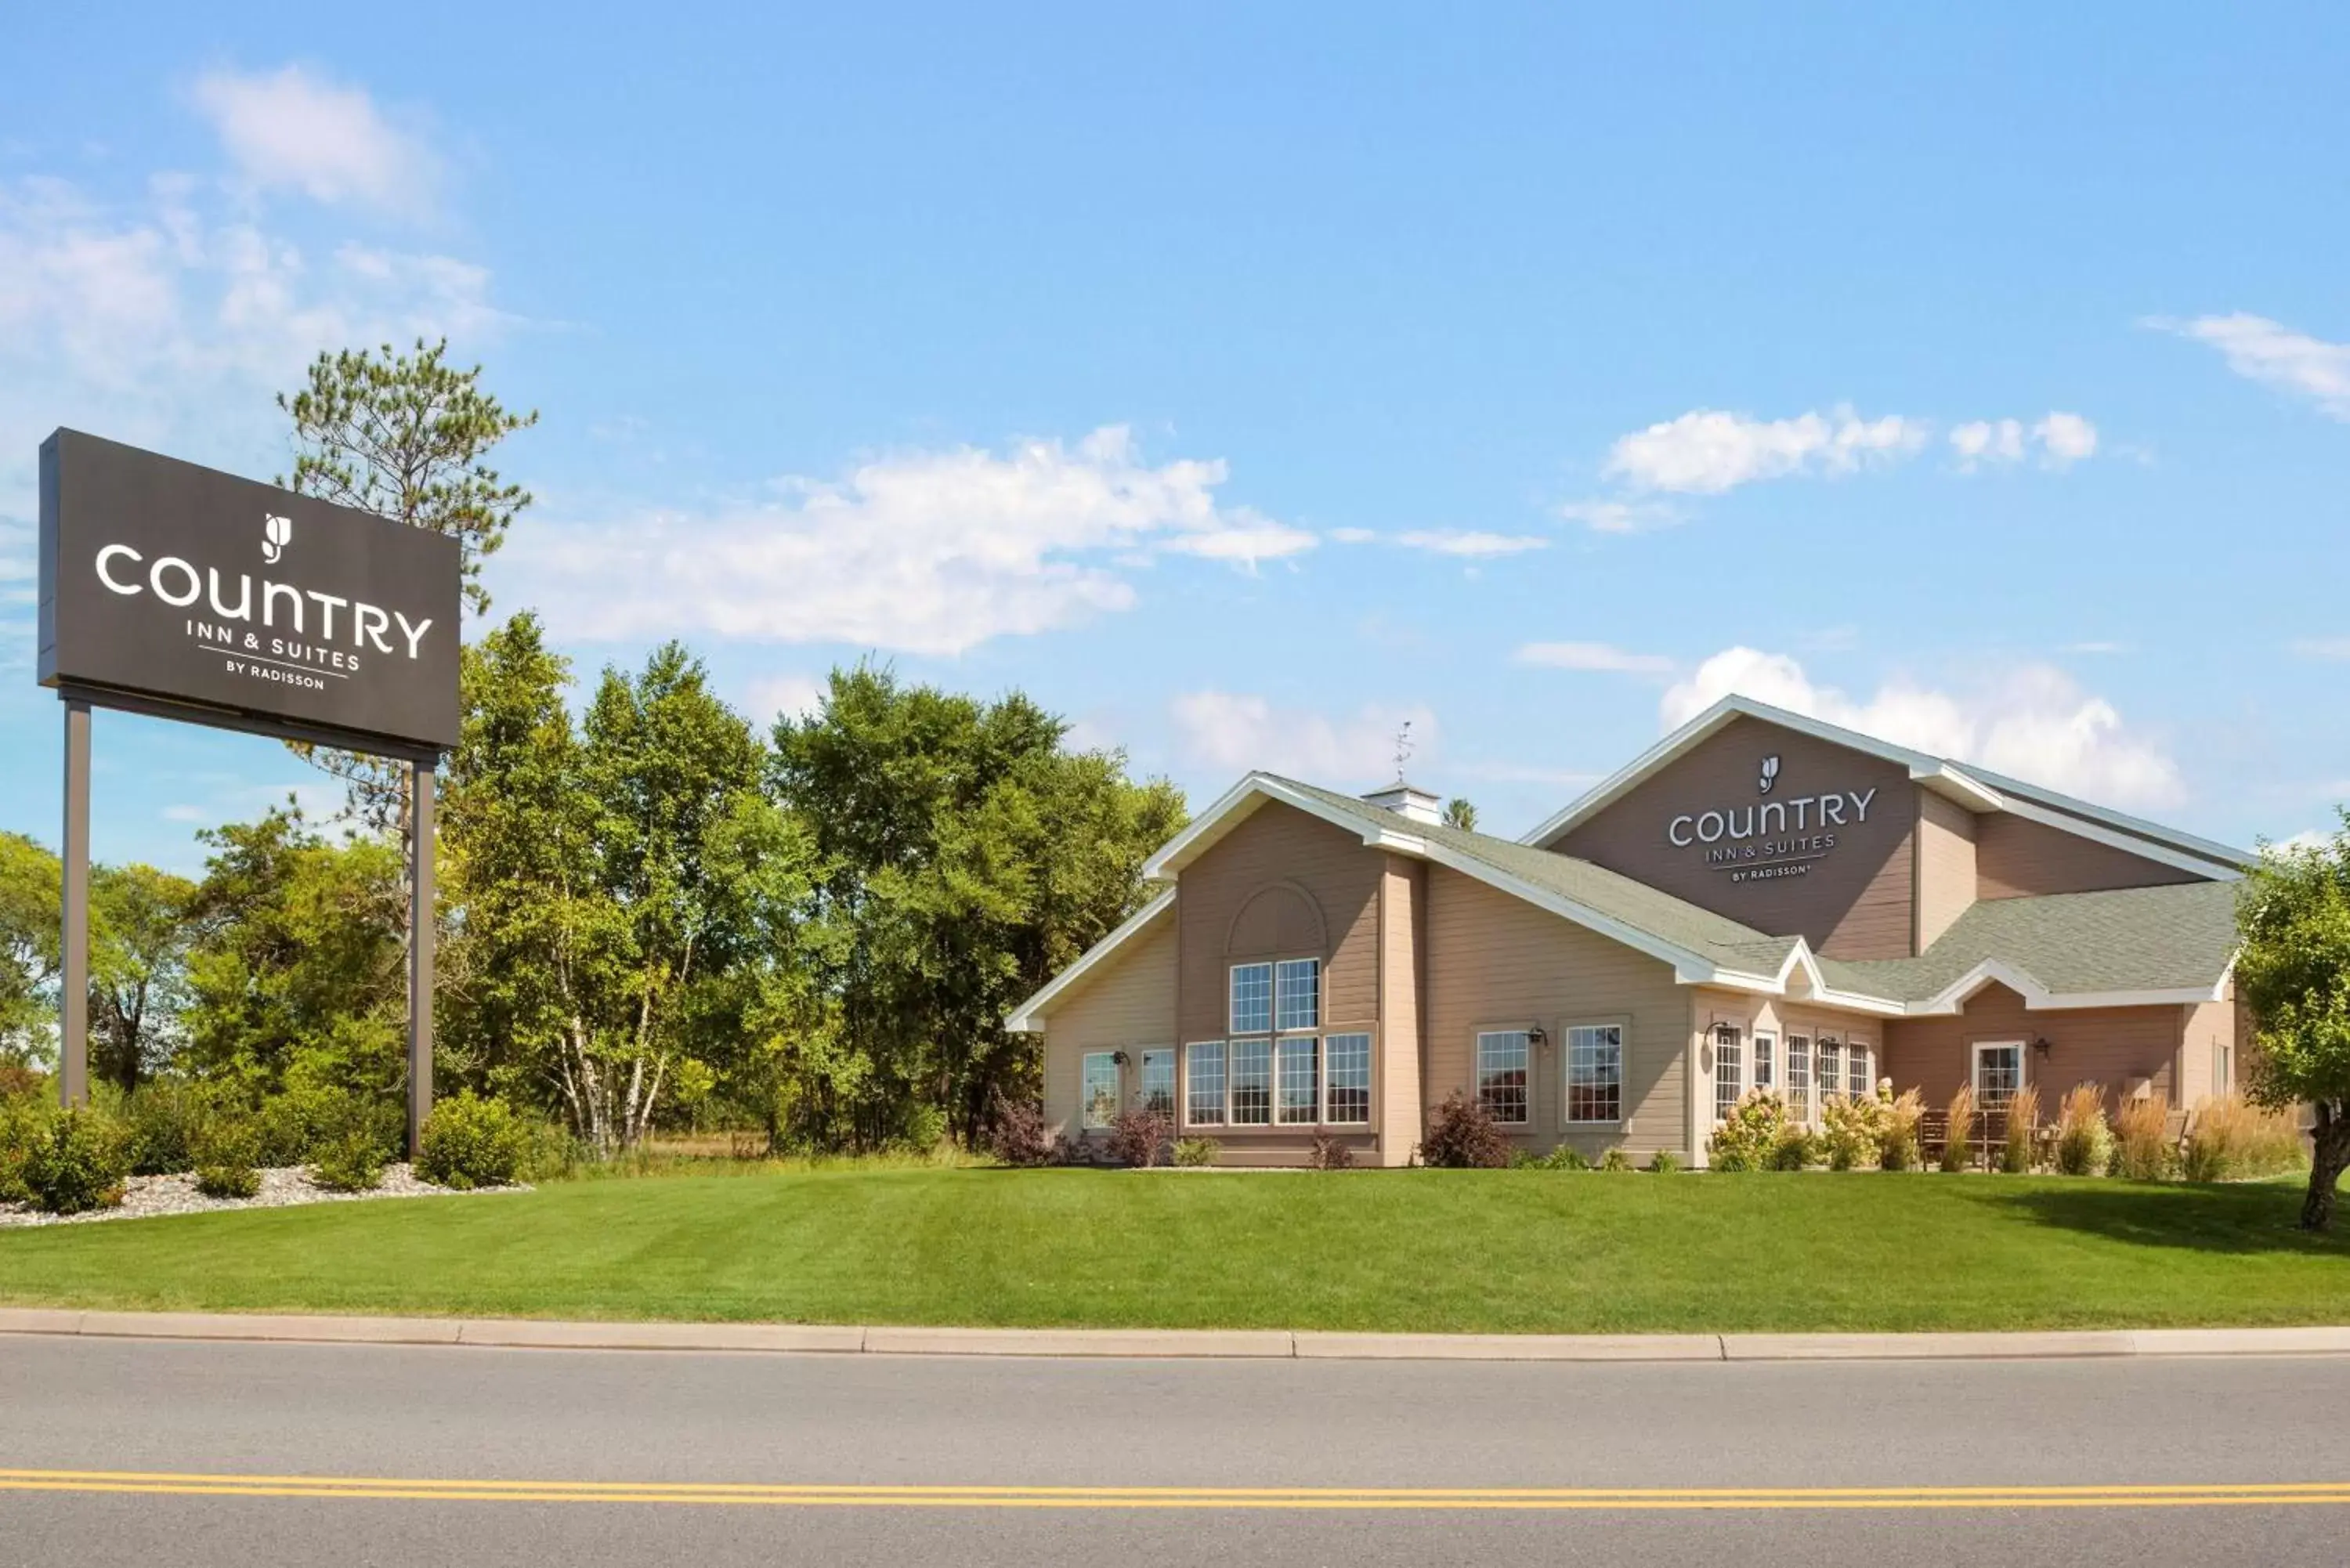 Property Building in Country Inn & Suites by Radisson, Baxter, MN